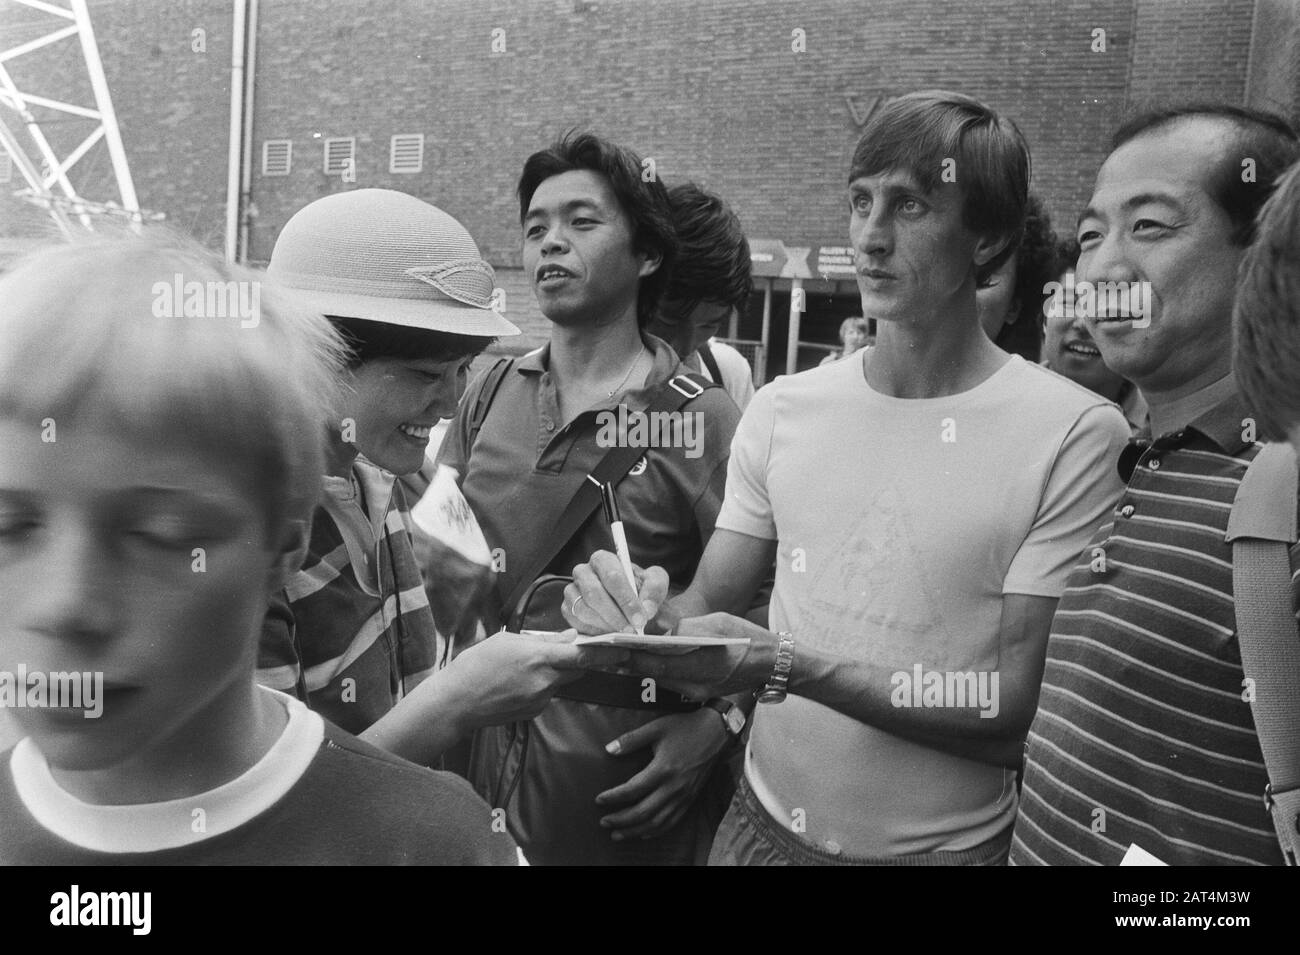 National Archive  Japanese football fans with Johan Cruijff (after training Ajax) Date: July 13, 1982 Manufacturer: Anefo/Bogaerts Component Number: 932-2446 URL: [1] For more information about the National Archive: www.nationaalarchief.nl For more pictures from this and other collections, visit our Stock Photo